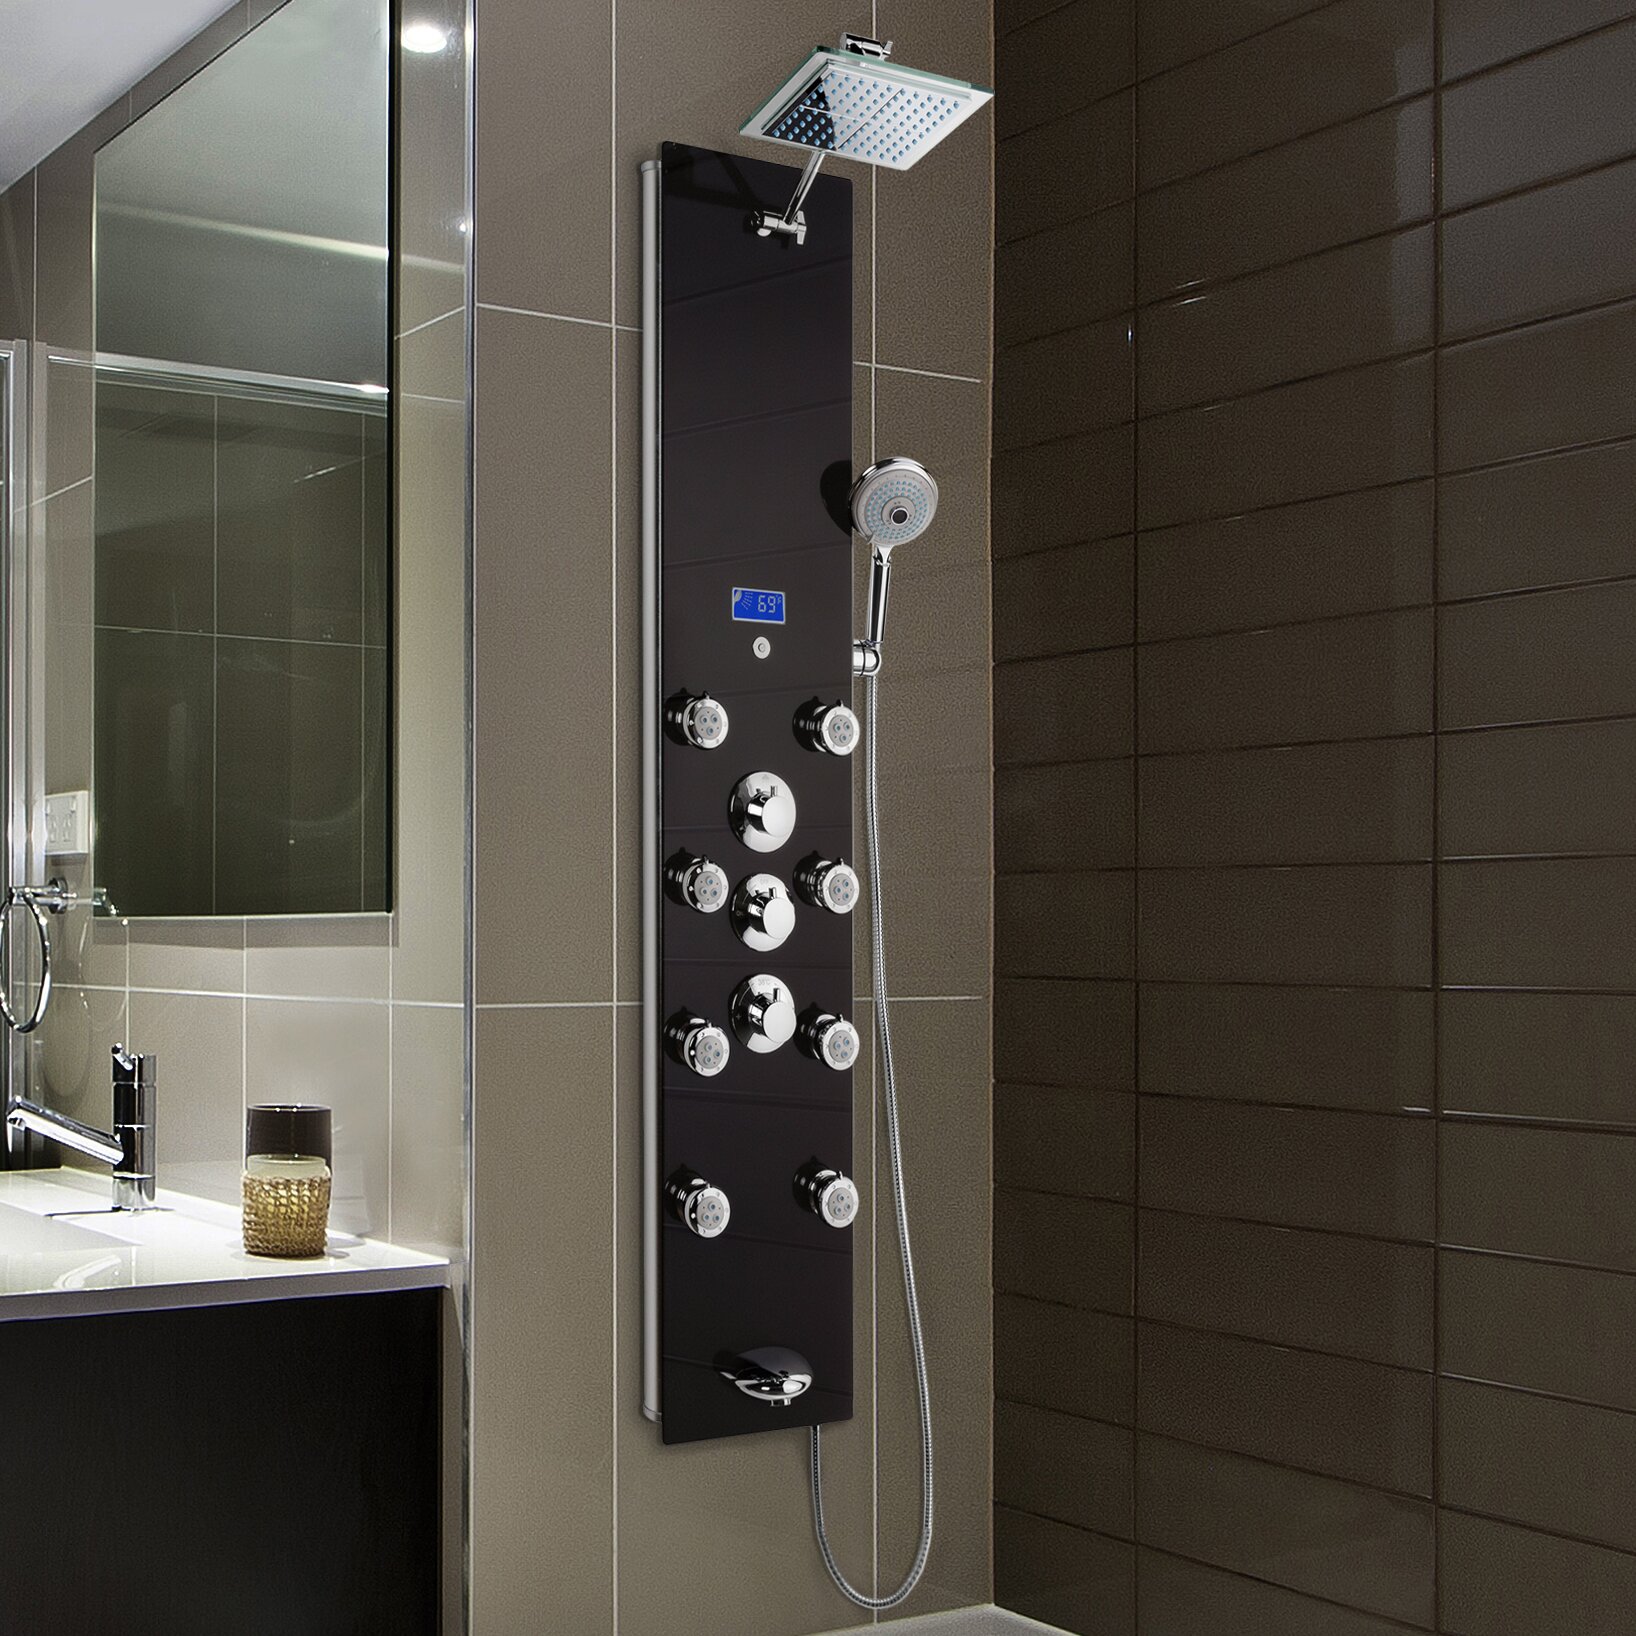 Shower panel tower system